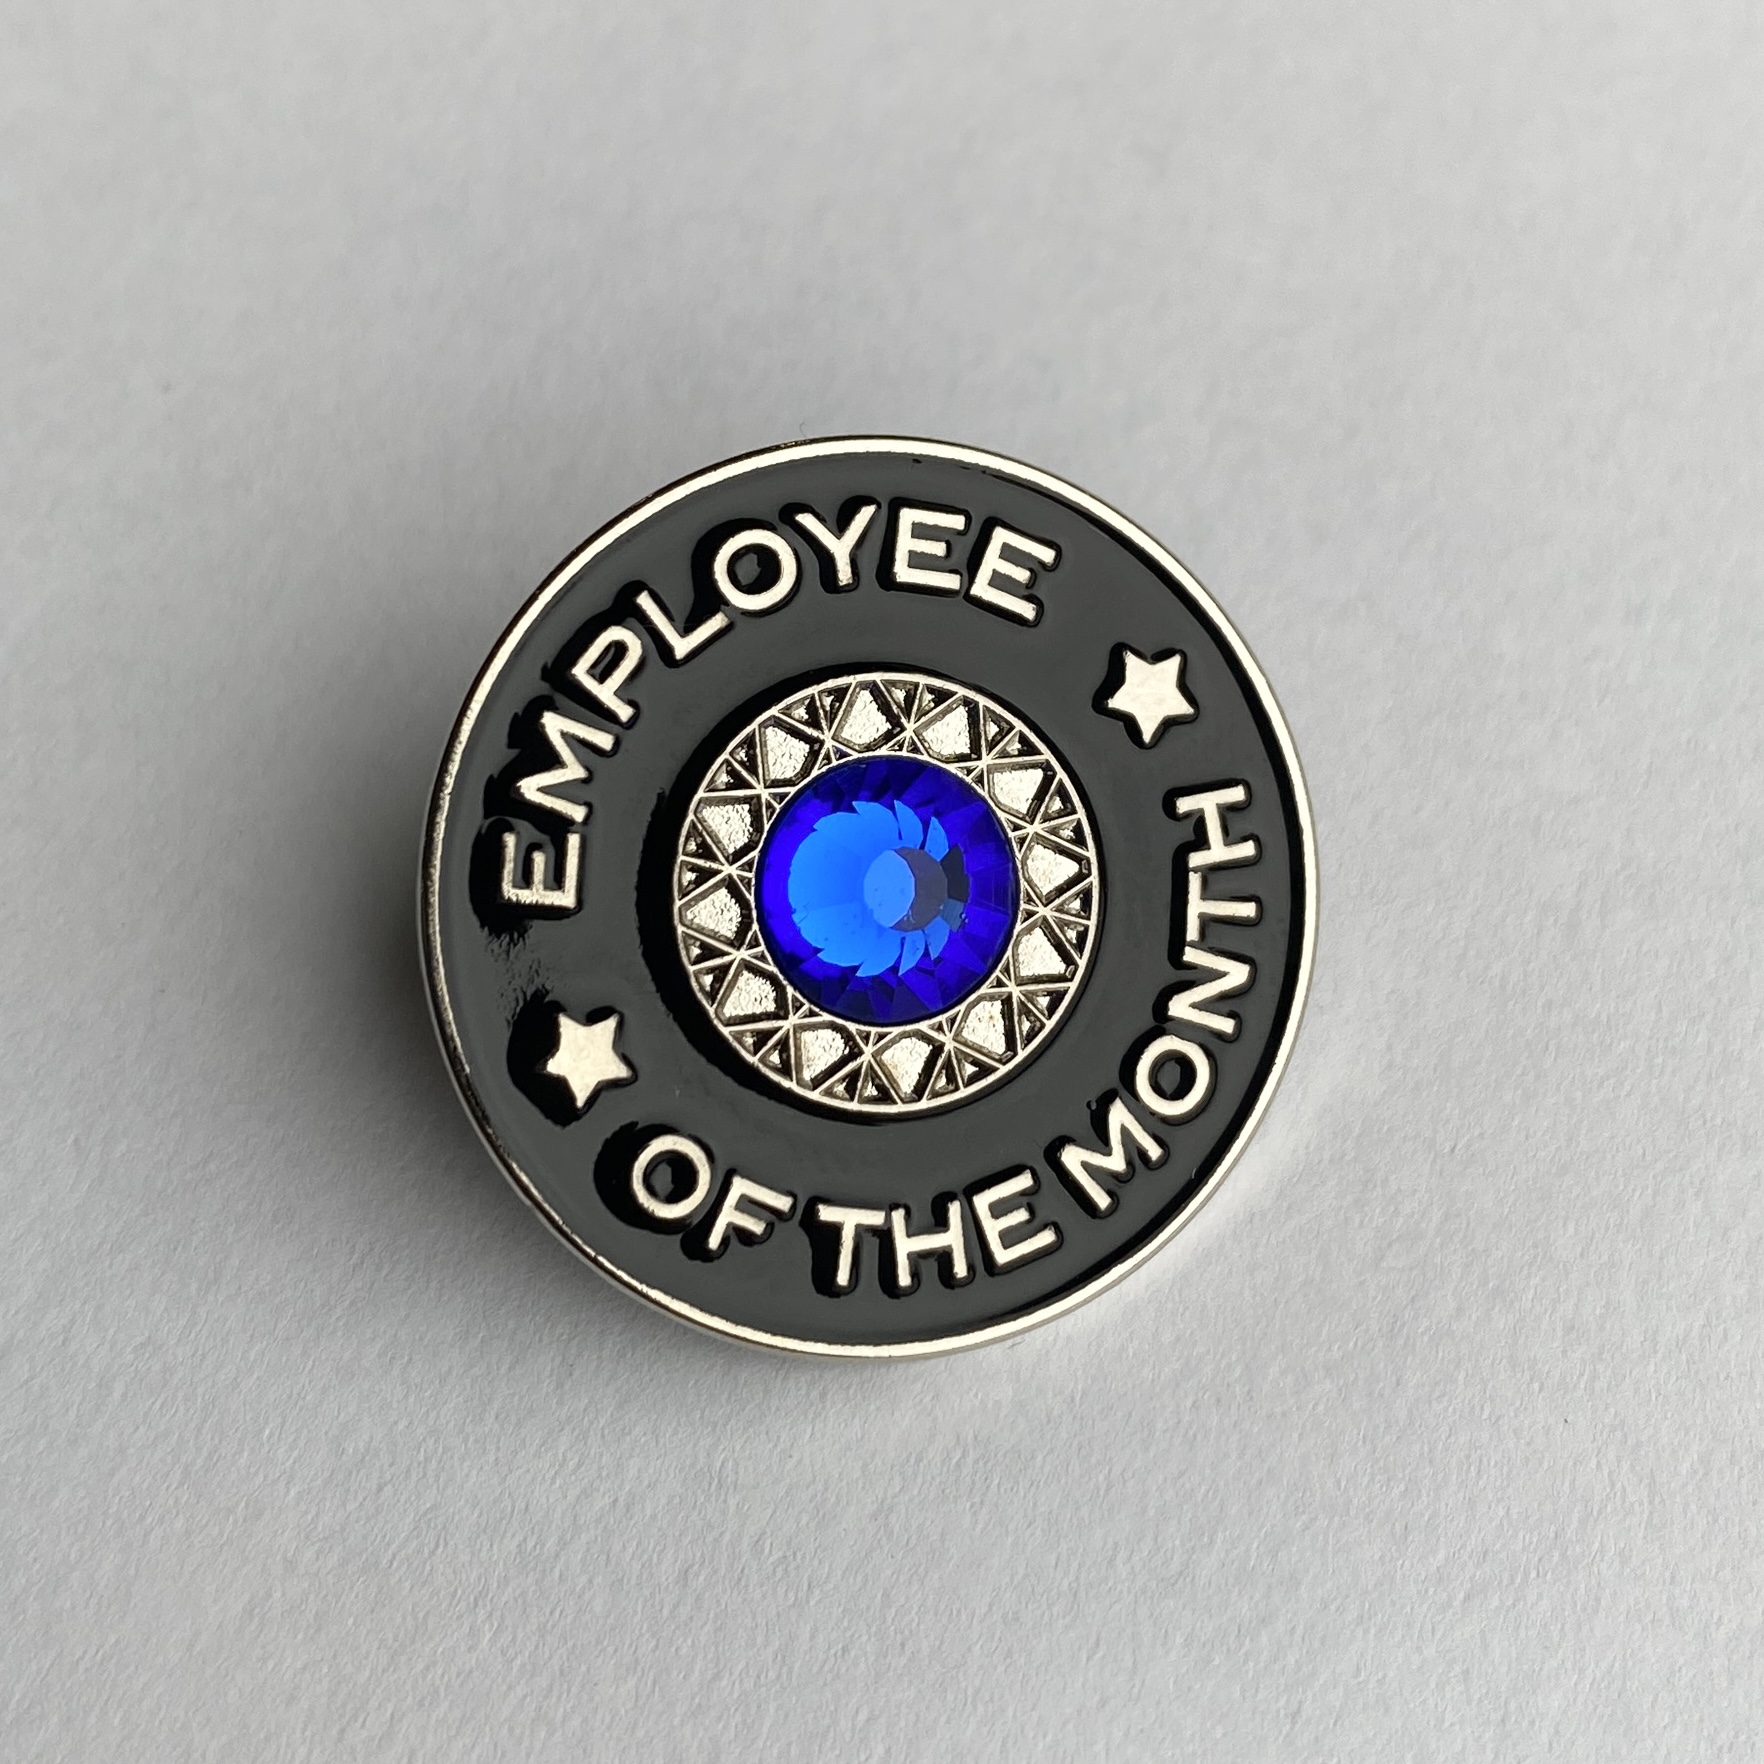 Employee Of The Month Blue Sapphire Stone Award Lapel Pin The Pin People